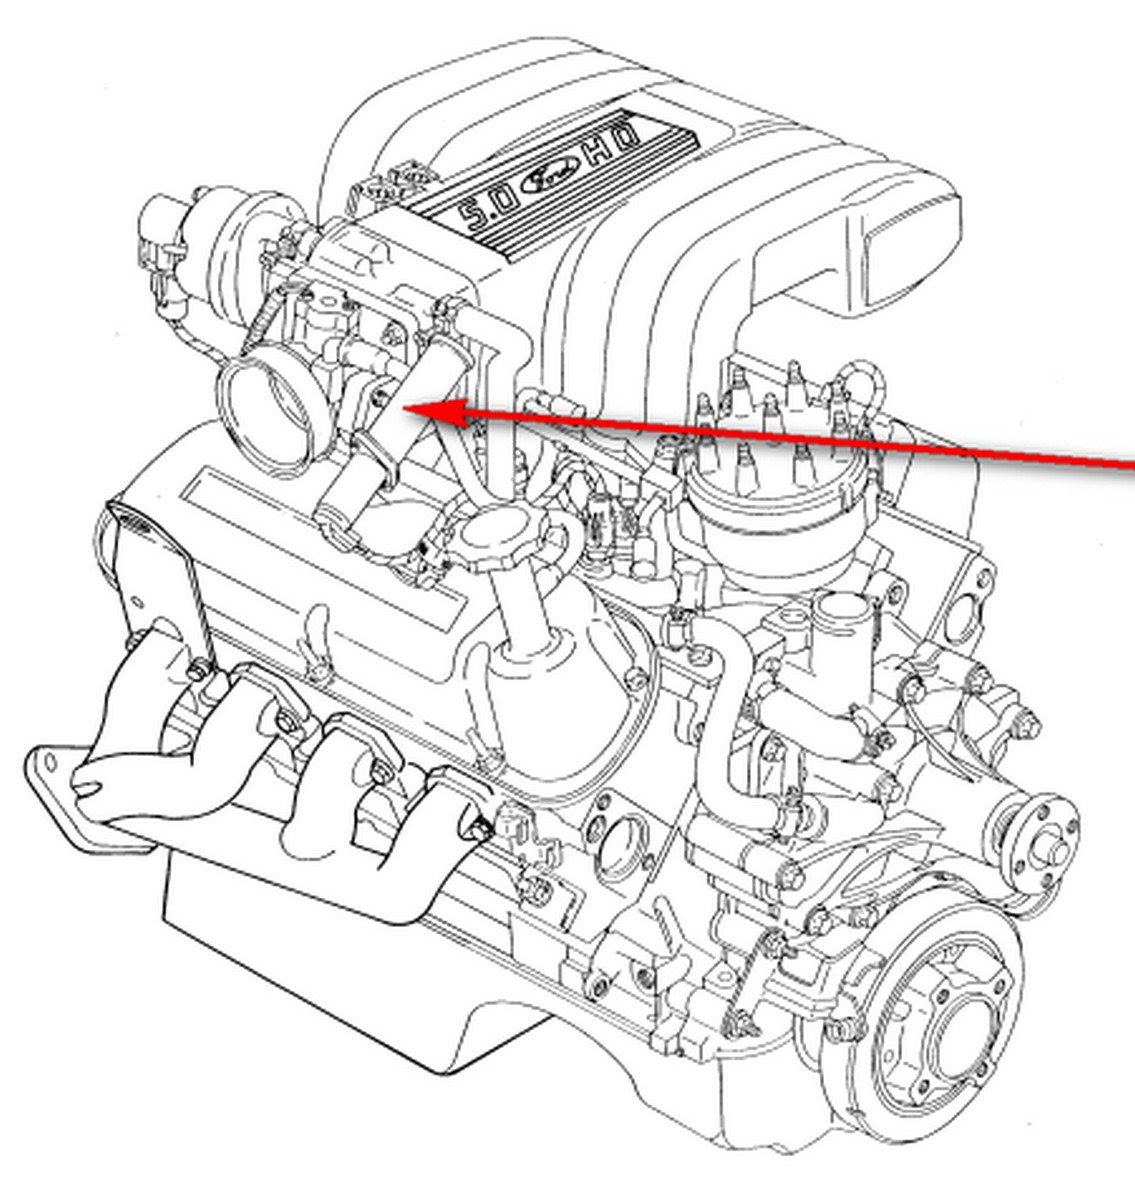 Ford Mustang 5 0 Engine Diagram - Fuse & Wiring Diagram